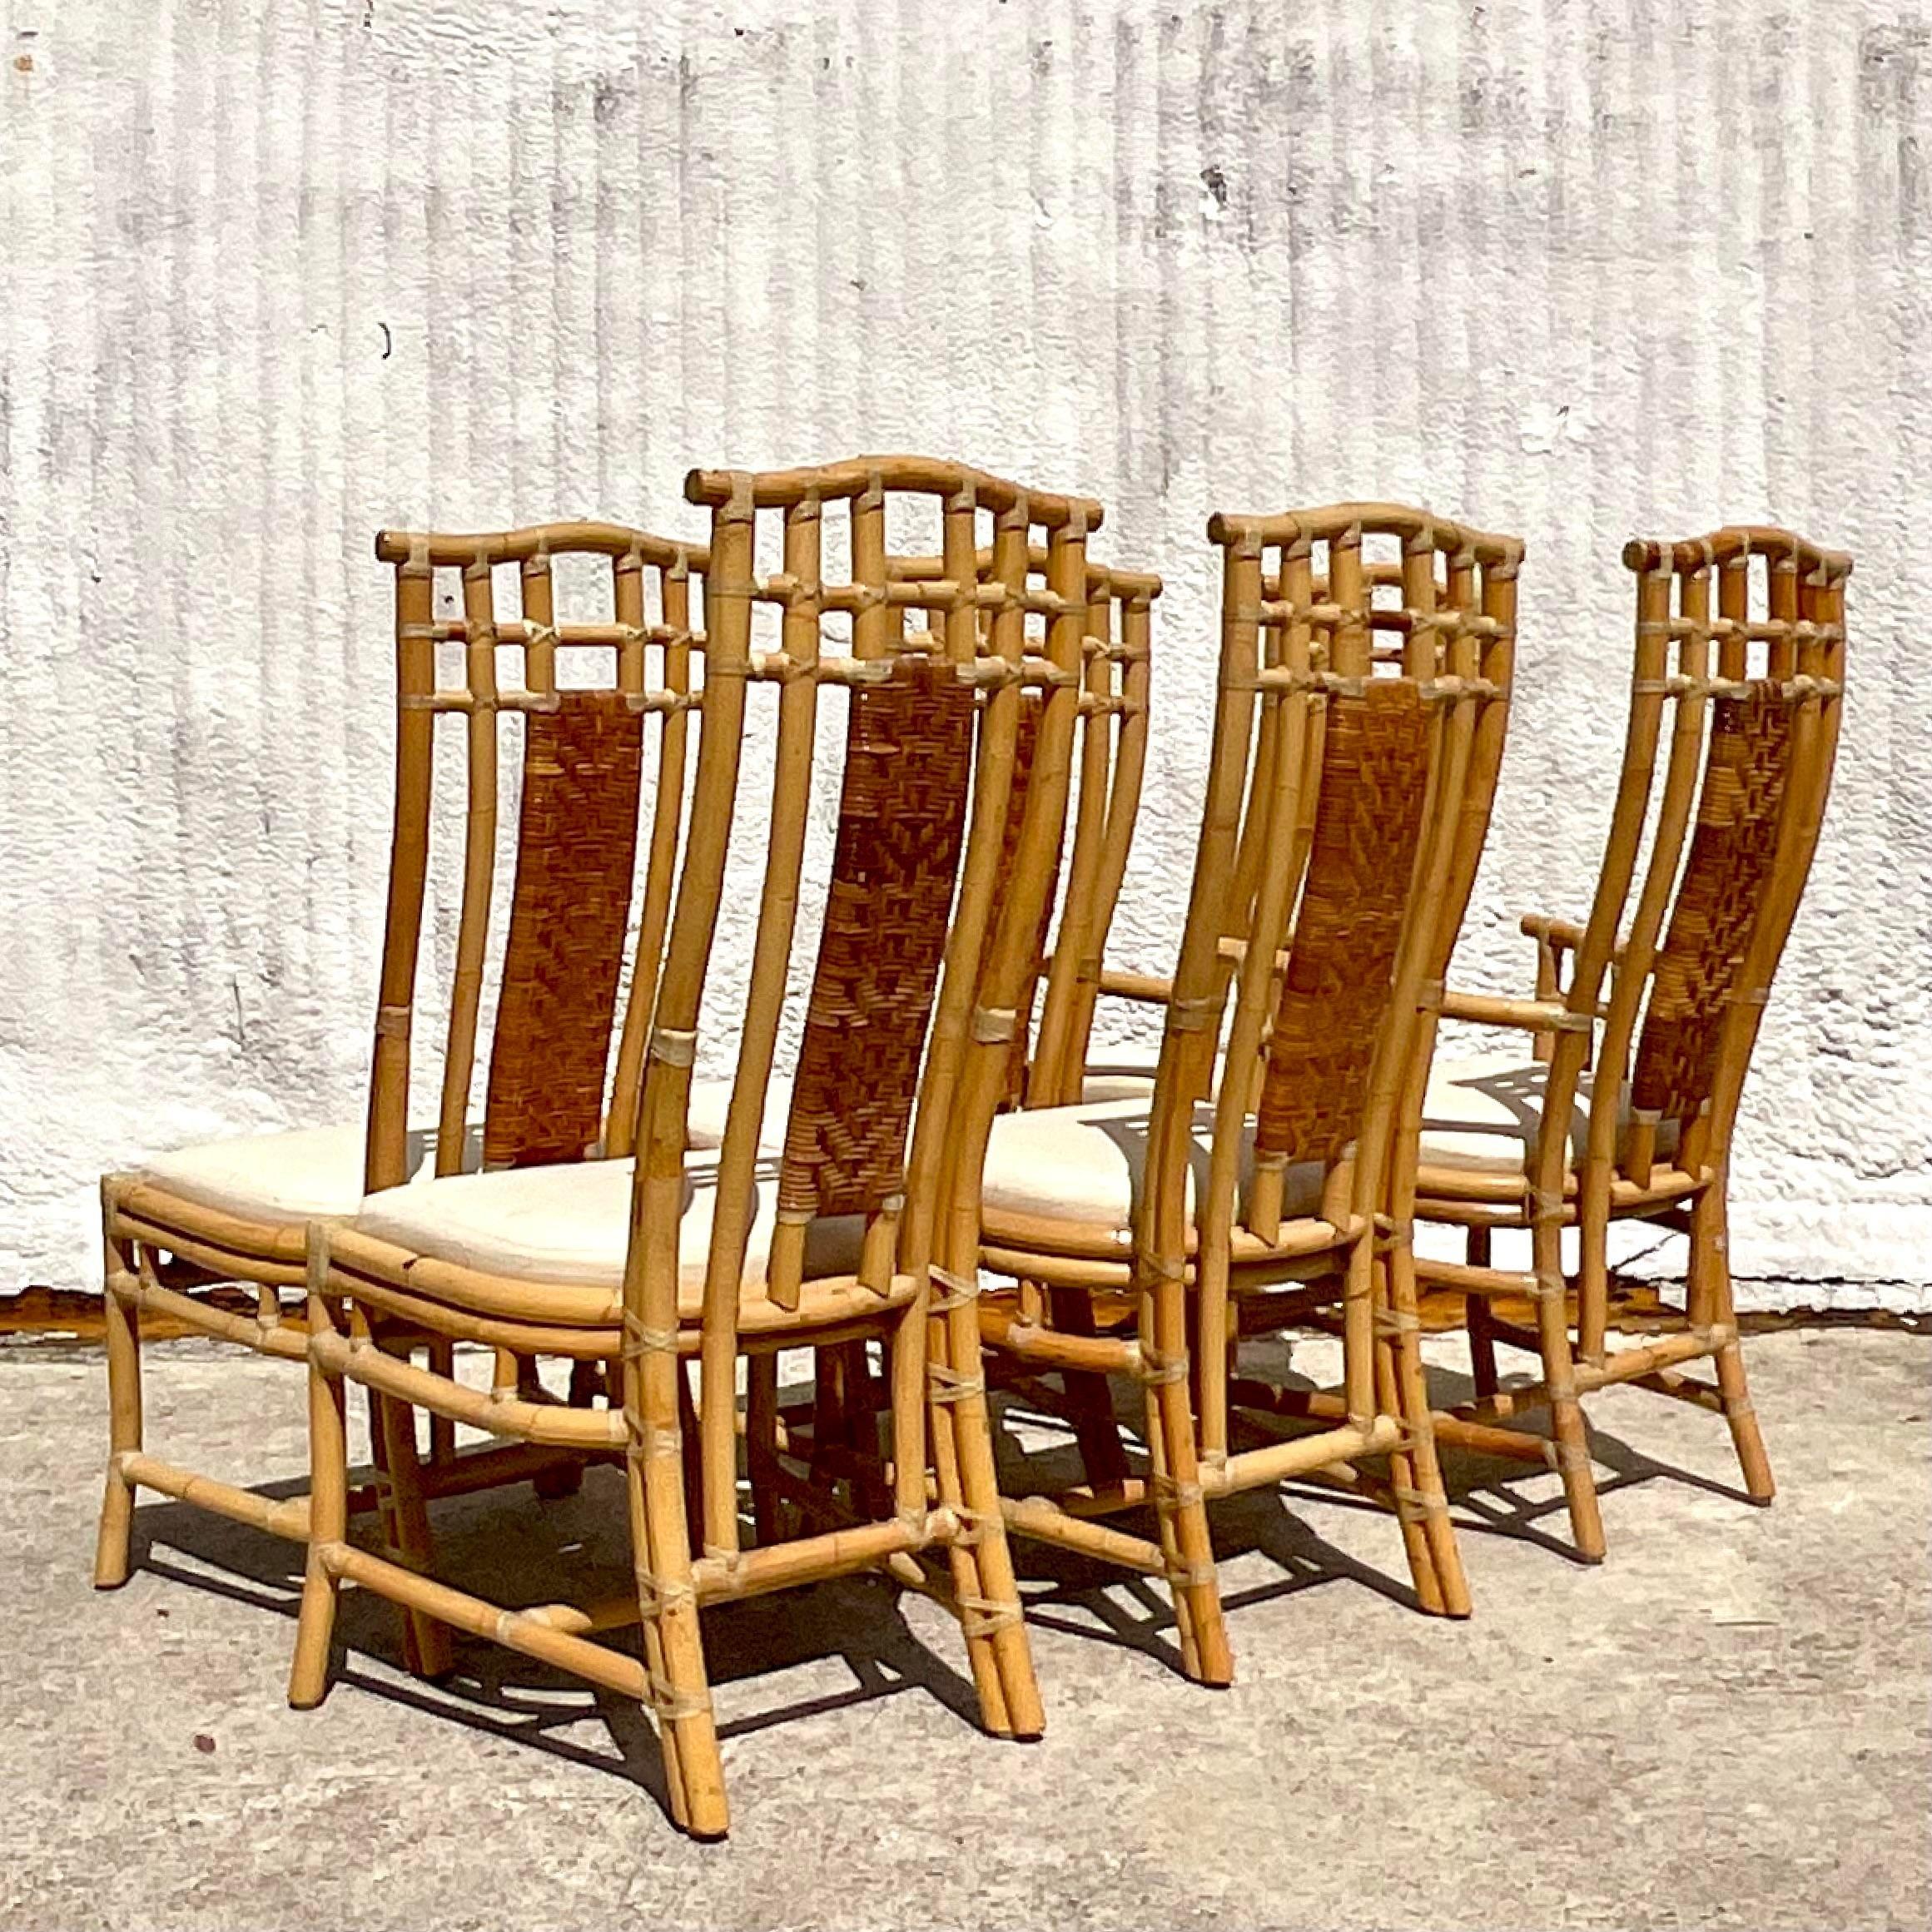 Transform your dining space with this set of six Vintage Coastal High Back Woven Rattan Chairs. Embodying the relaxed elegance of coastal living in America, each chair boasts artisanal craftsmanship and timeless charm, creating a welcoming